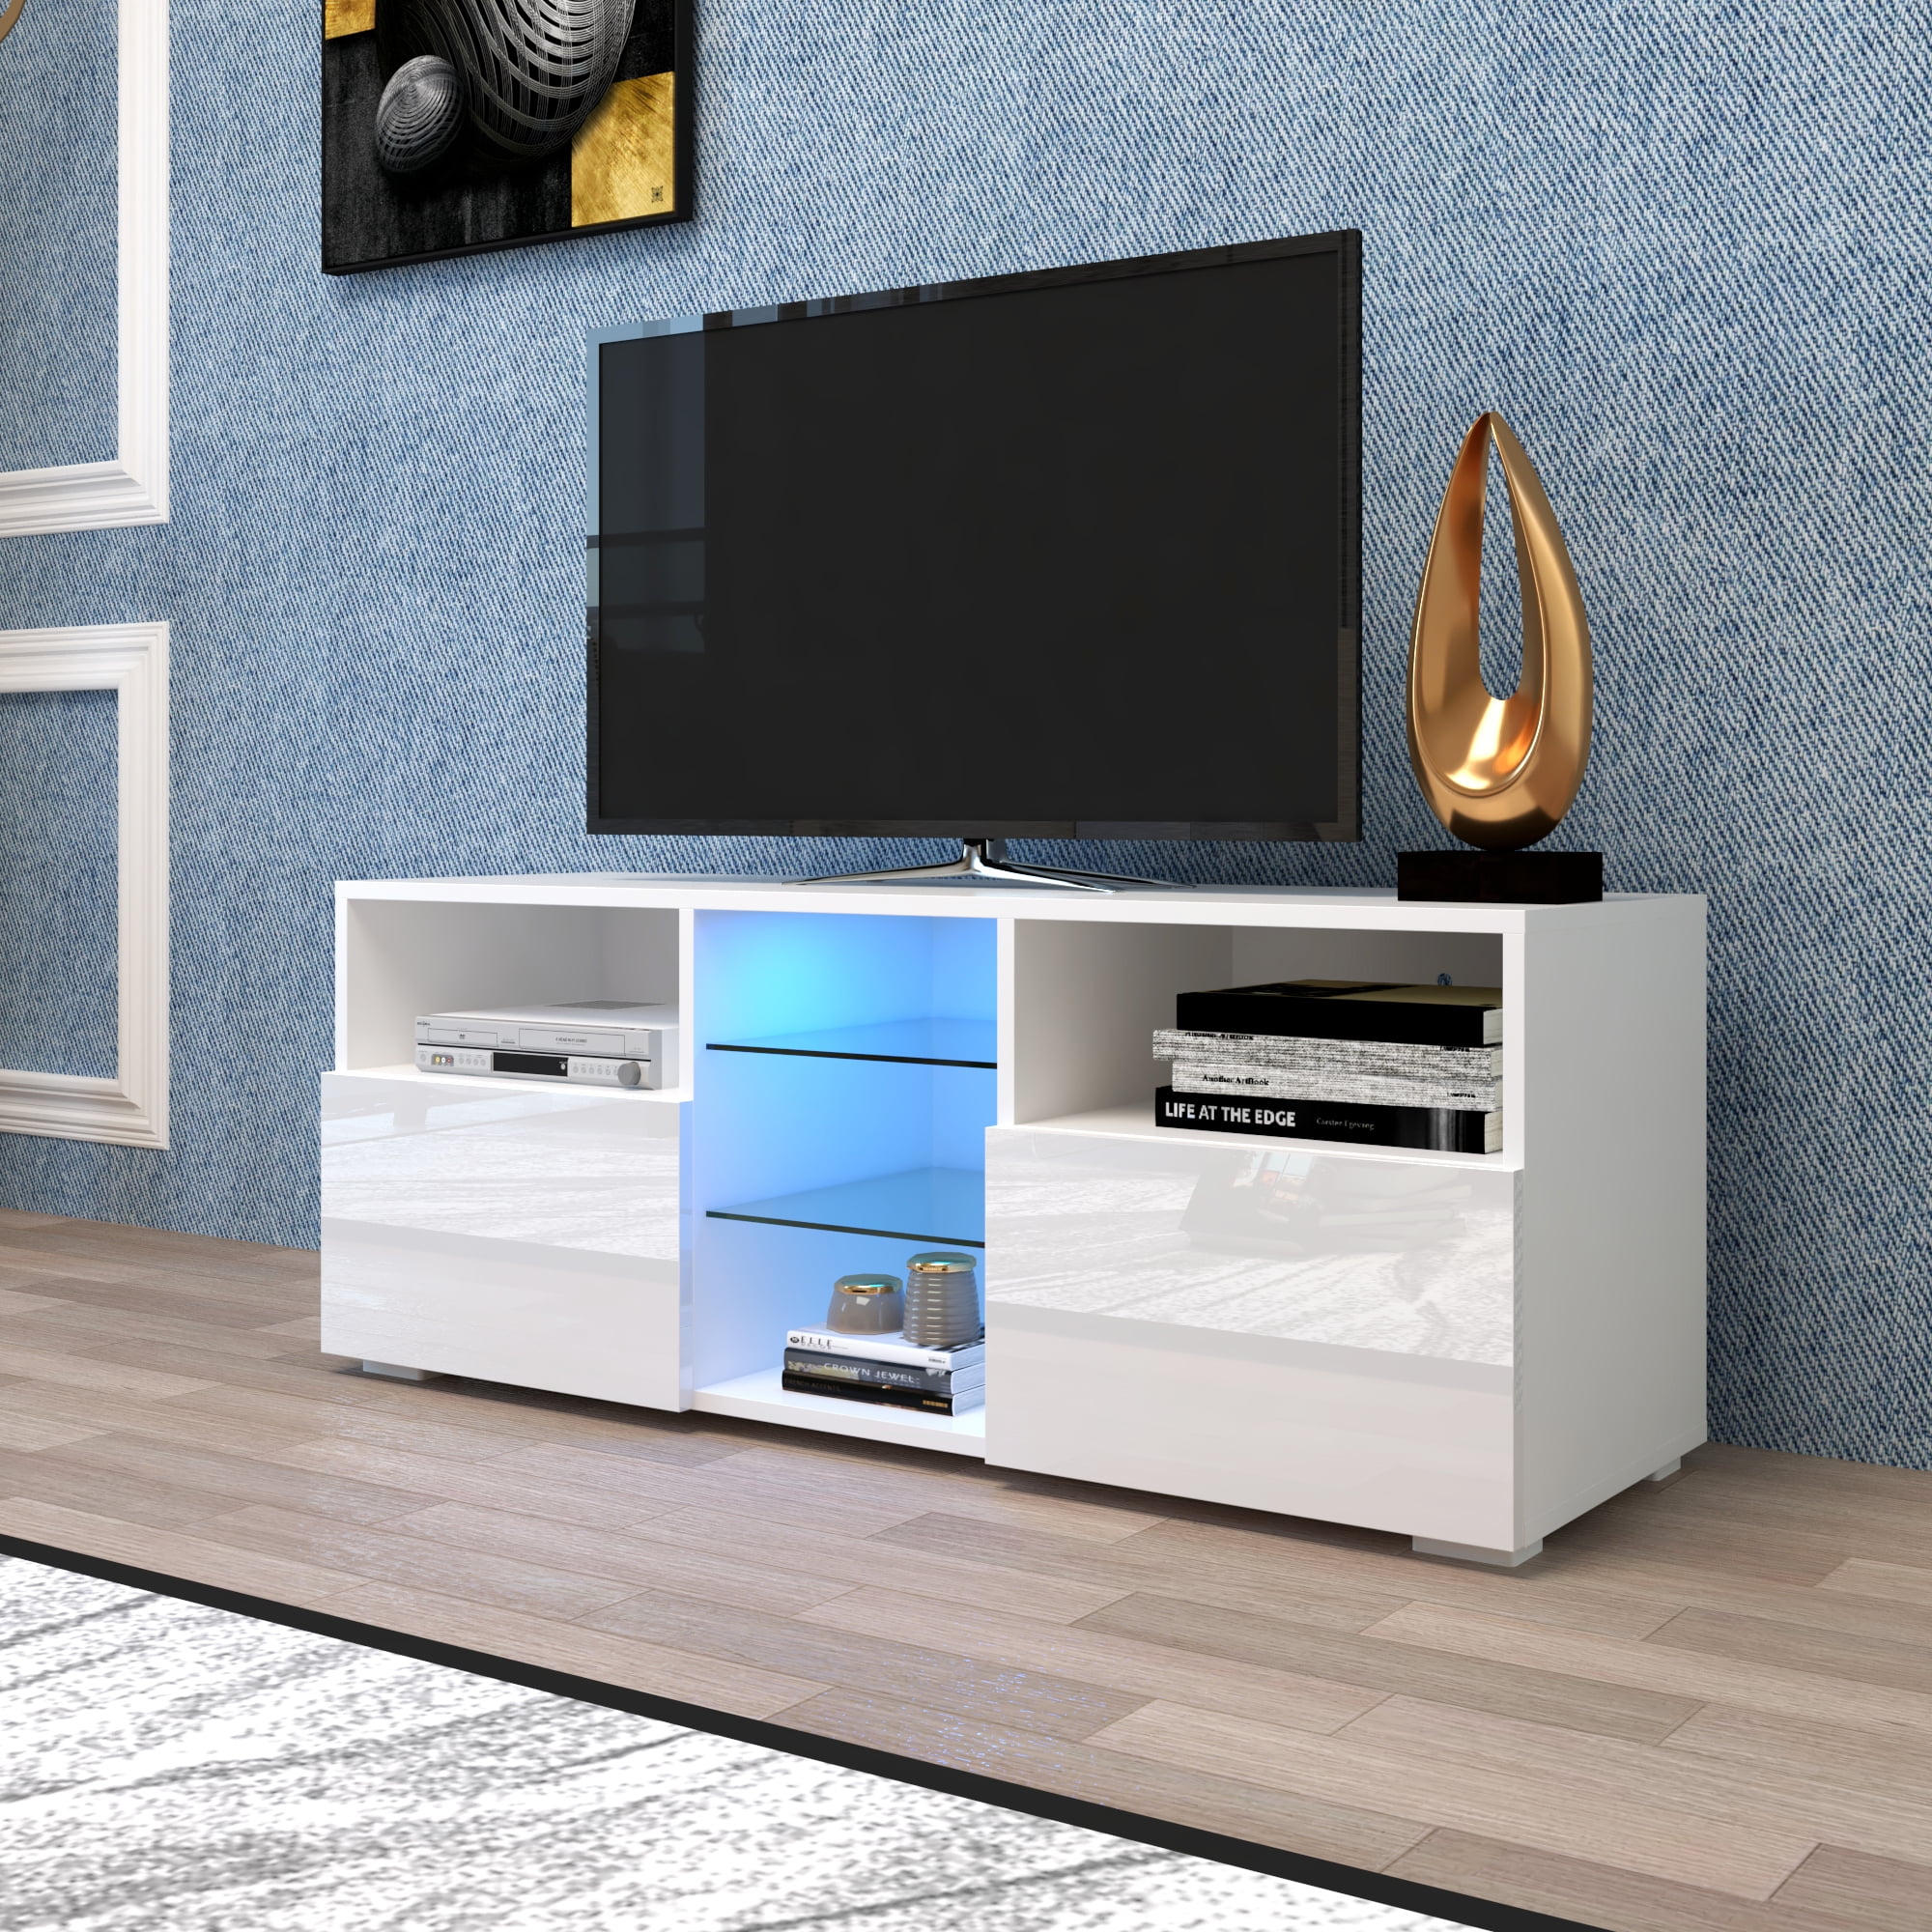 Details about   Modern TV Stand Storage Console Cabinet Home Living Room Furniture Shelf Storage 